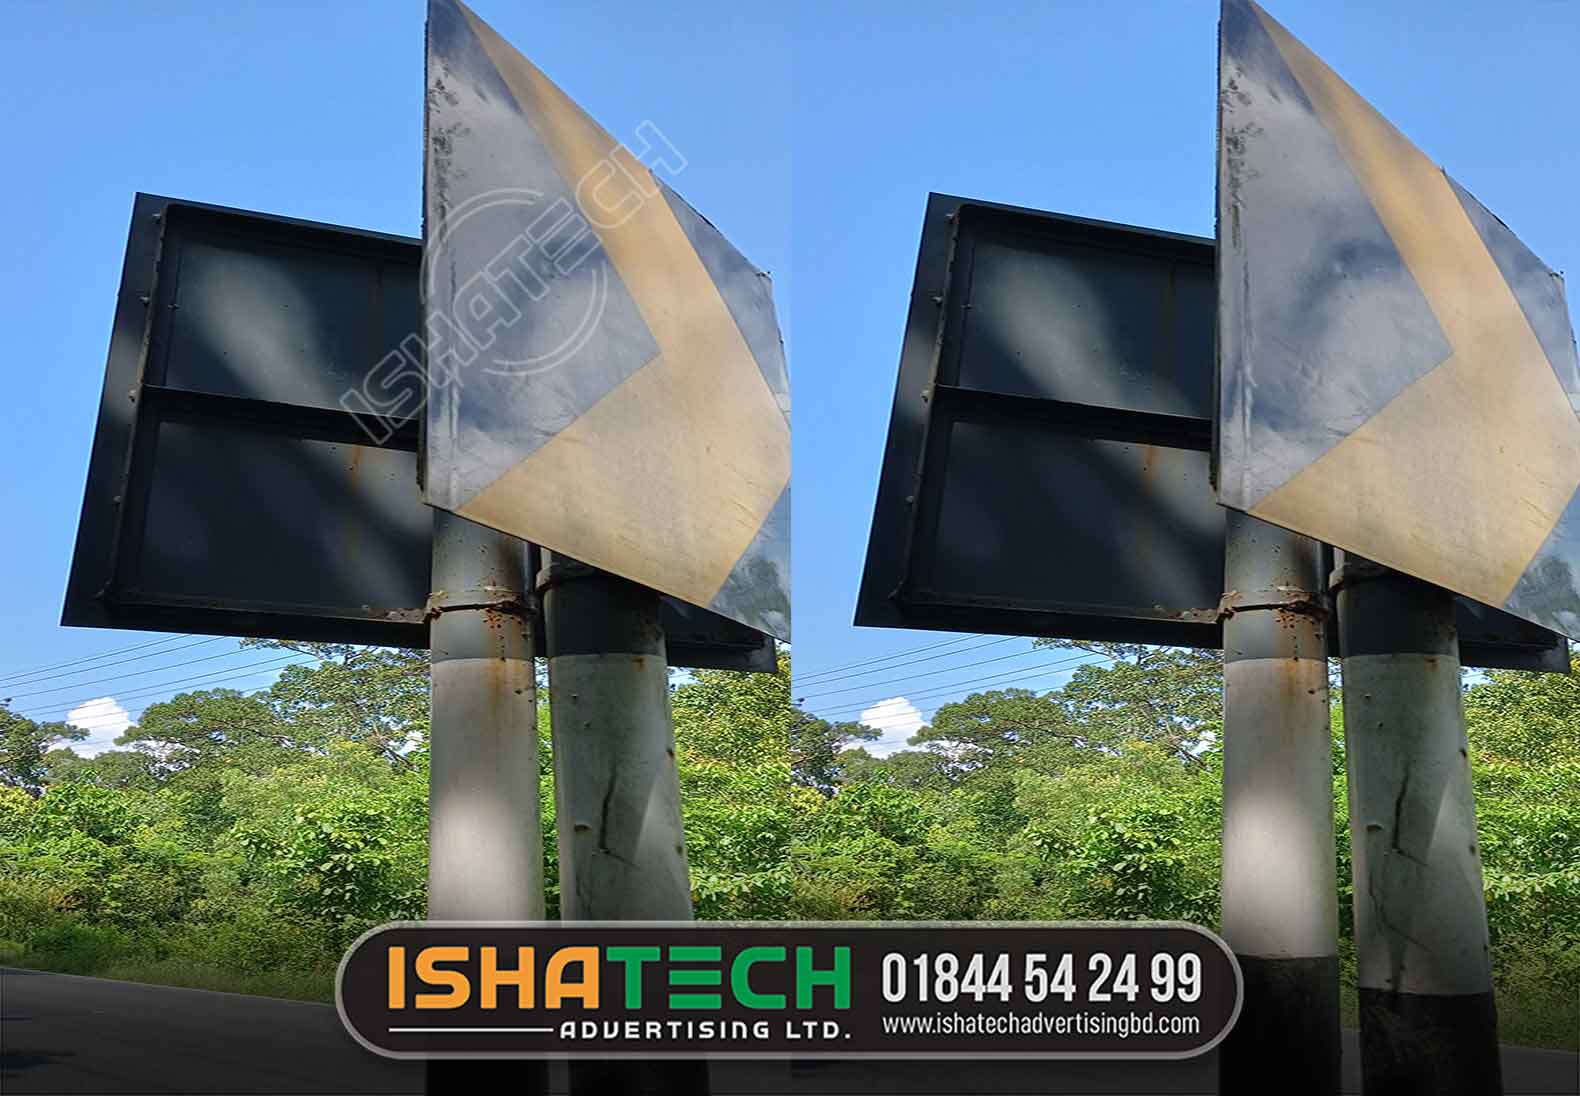 Road Safety Sign Latest Price, Manufacturers & Suppliers. Traffic Sign Board, Road Signs Test manufacturers, suppliers & exporters in India. Get contact details & address of companies manufacturing. Traffic Sign Display Board Prices, Manufacturers & Suppliers in Dhaka, Bangladesh. List of Best Traffic Sign Board Companies in BD. Traffic Sign Board Manufacturers in BD. Retro Reflective Sign Boards, Traffic Sign, Road Safety. Traffic Signs in India: List of Road Safety Signs.